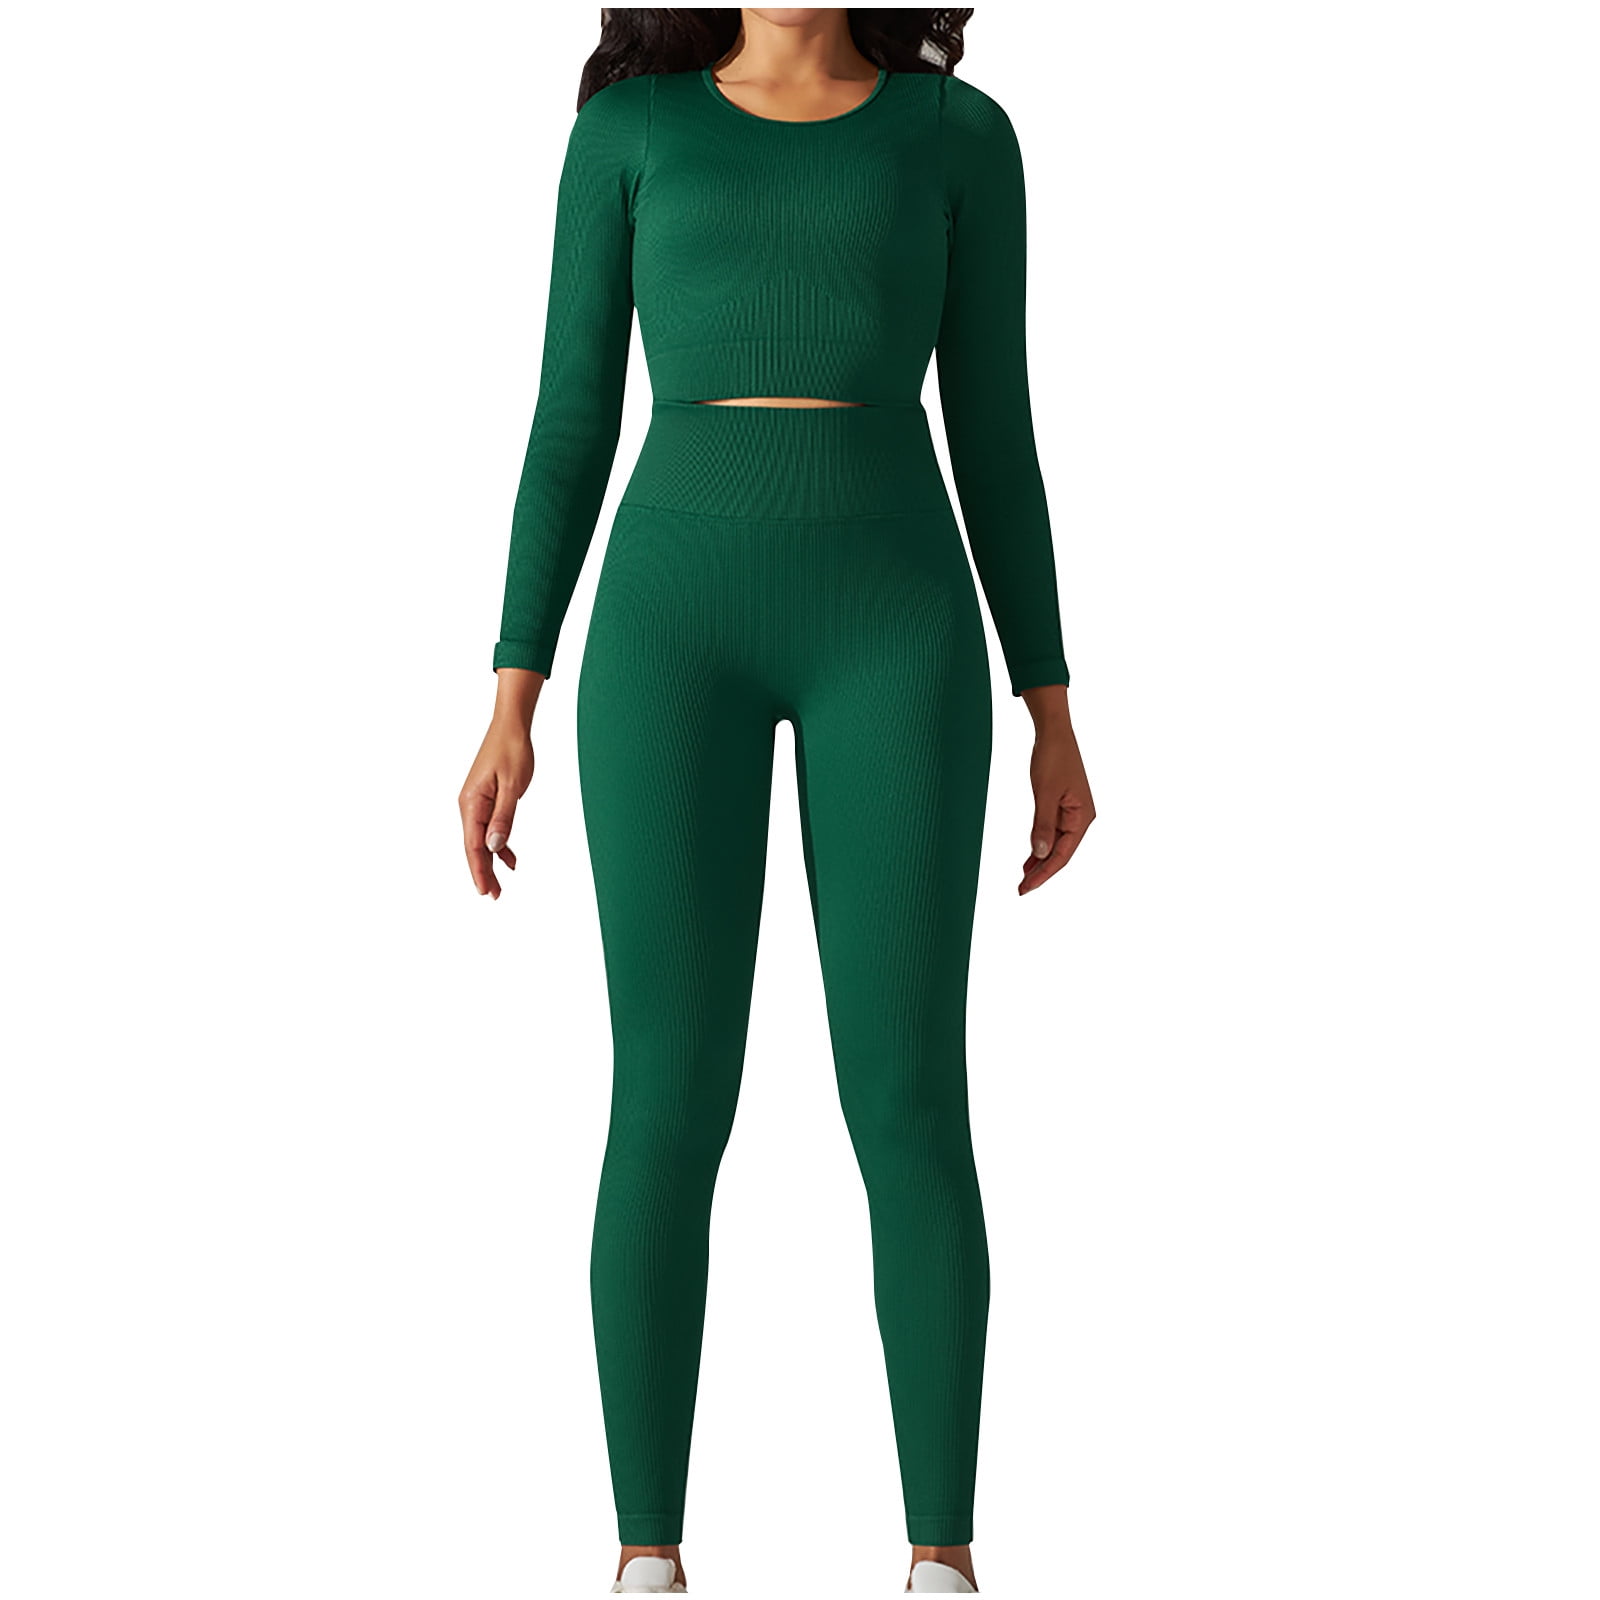  JOJOANS Workout Sets Women 2 Piece Outfits High Waist Seamless  Leggings and Crop Top Yoga Set Gym(Green S) : Clothing, Shoes & Jewelry